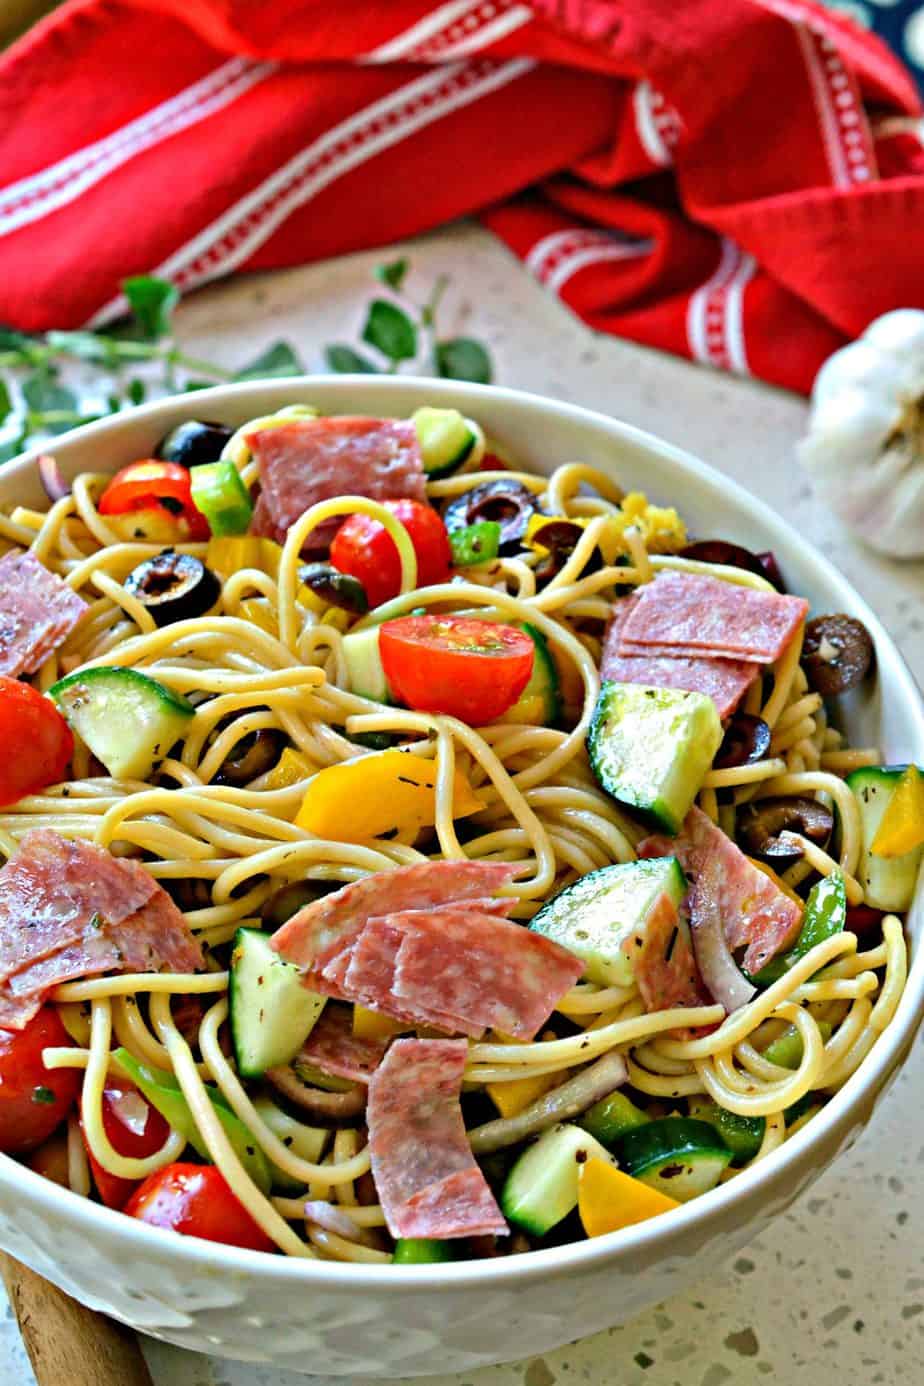 This Spaghetti Salad makes a delicious quick and easy light summer meal or side for all your grilling recipes.